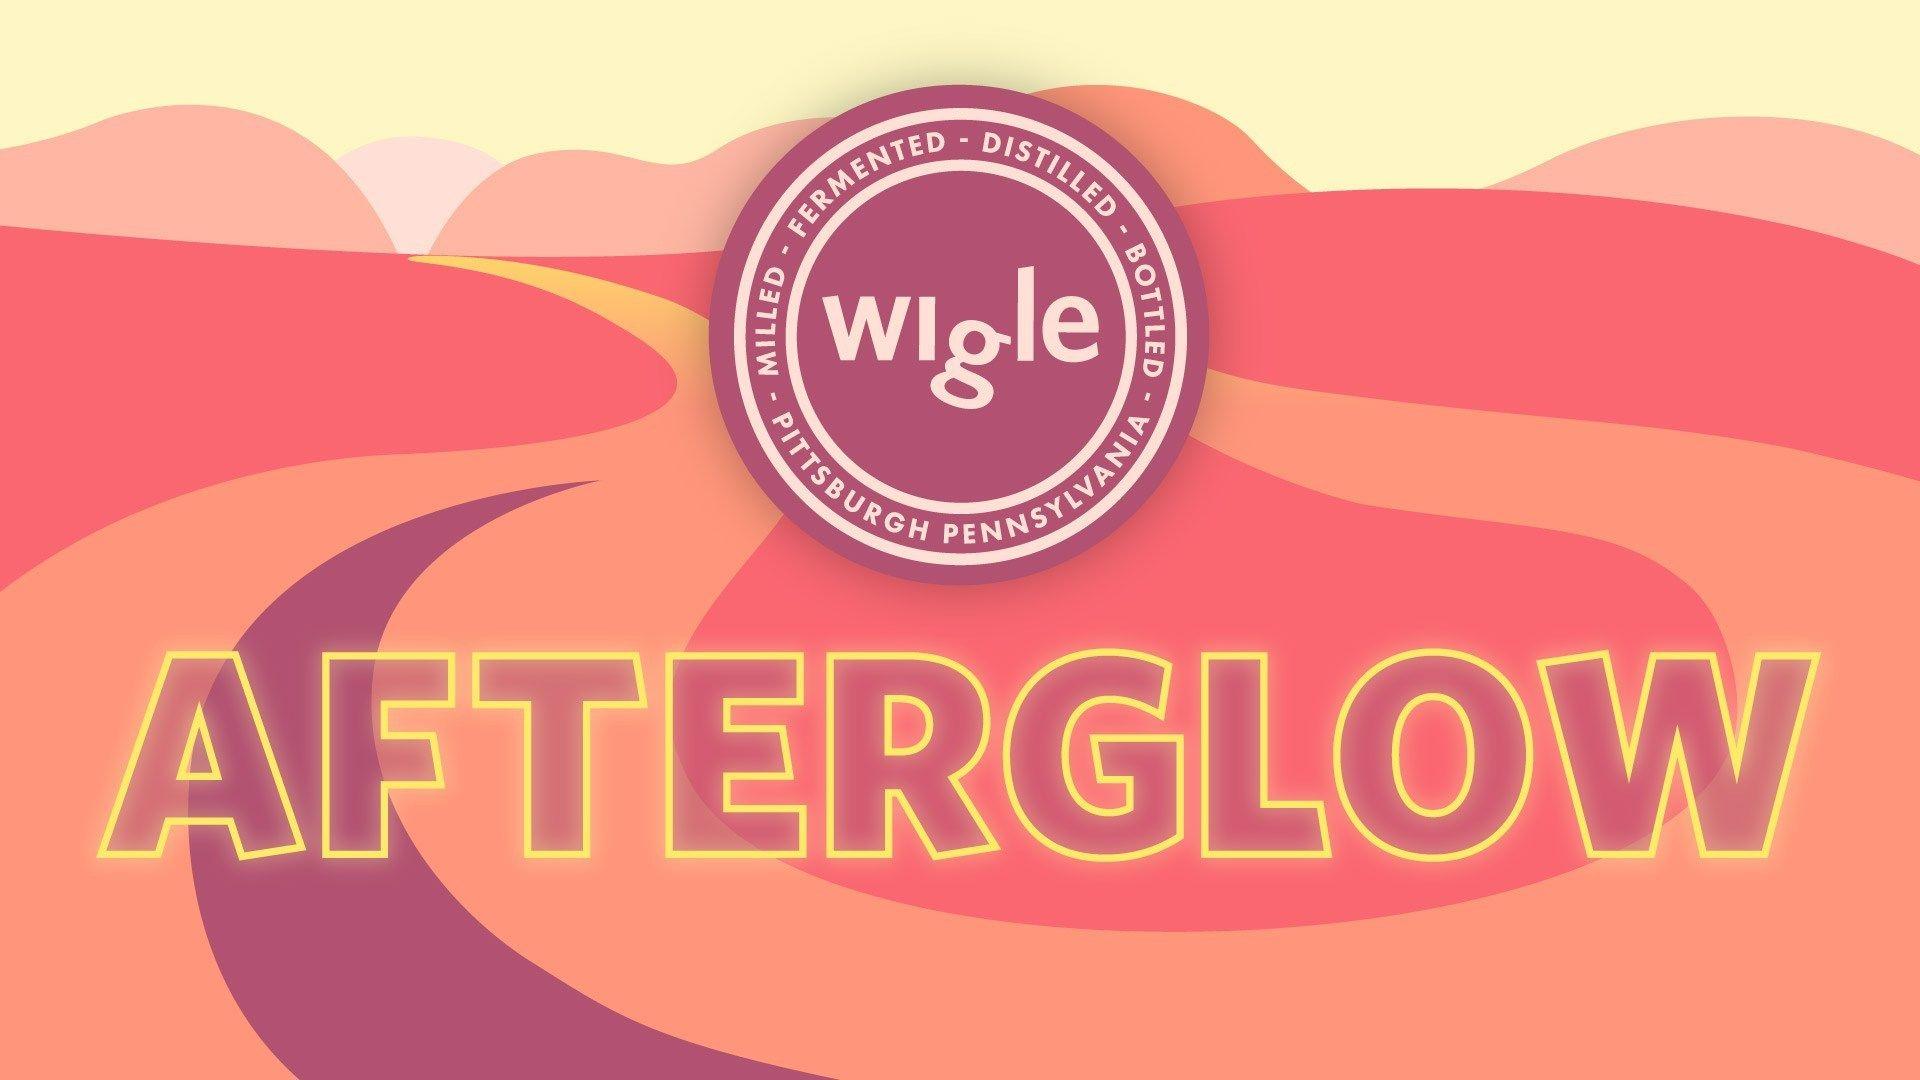 Ginger.io Logo - Afterglow Ginger Party! – Wigle Whiskey